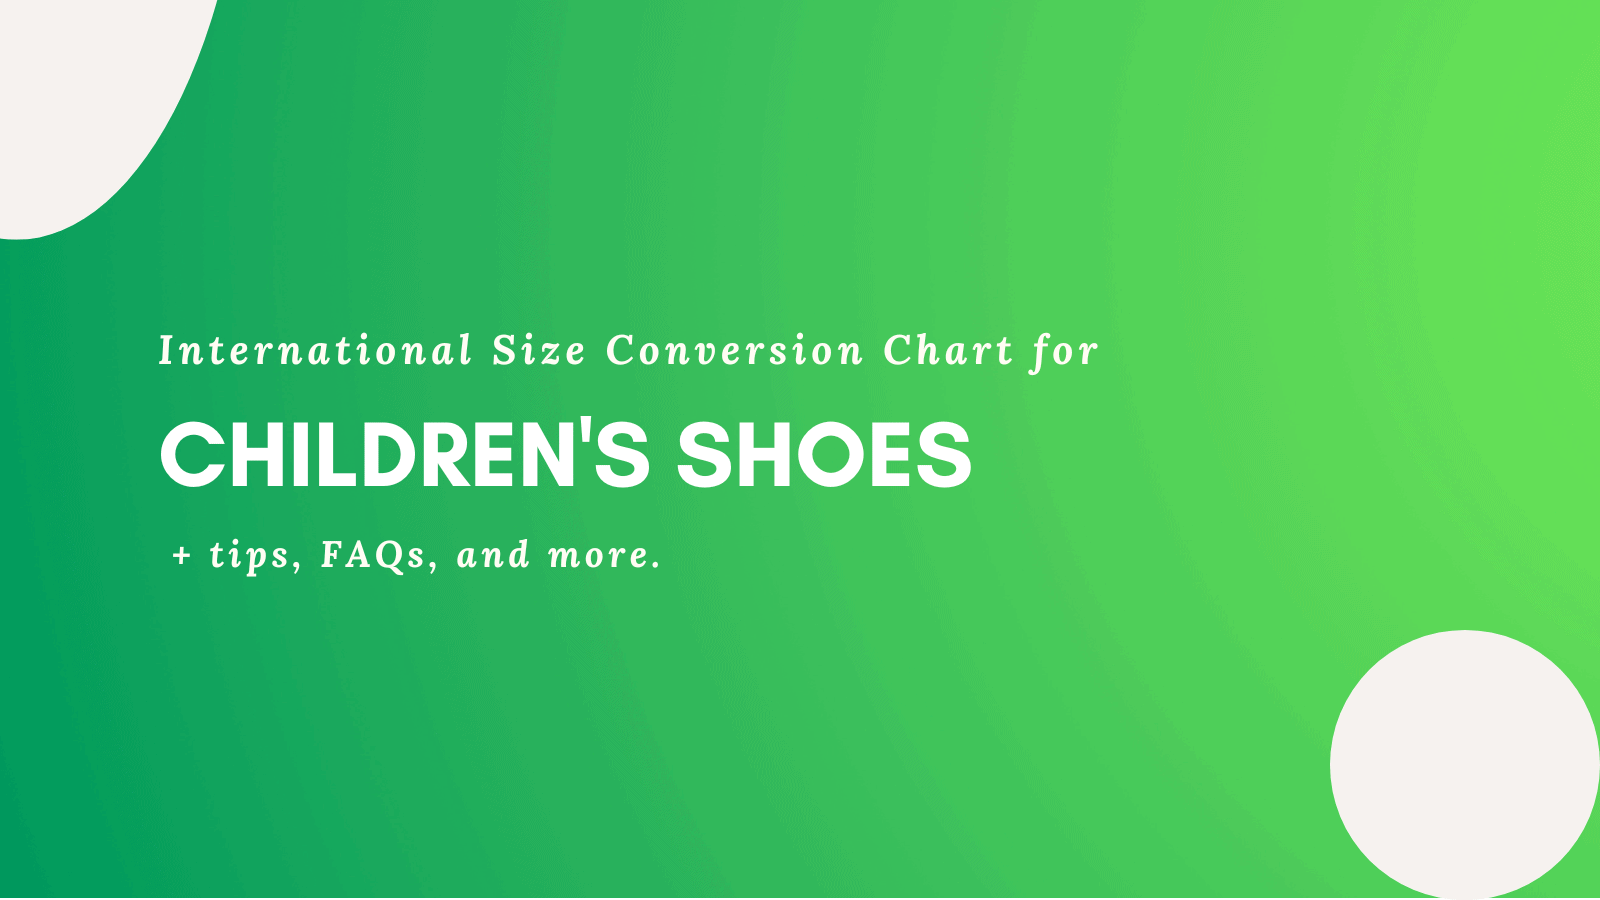 How to Convert Women's to Kids' Shoe Sizing